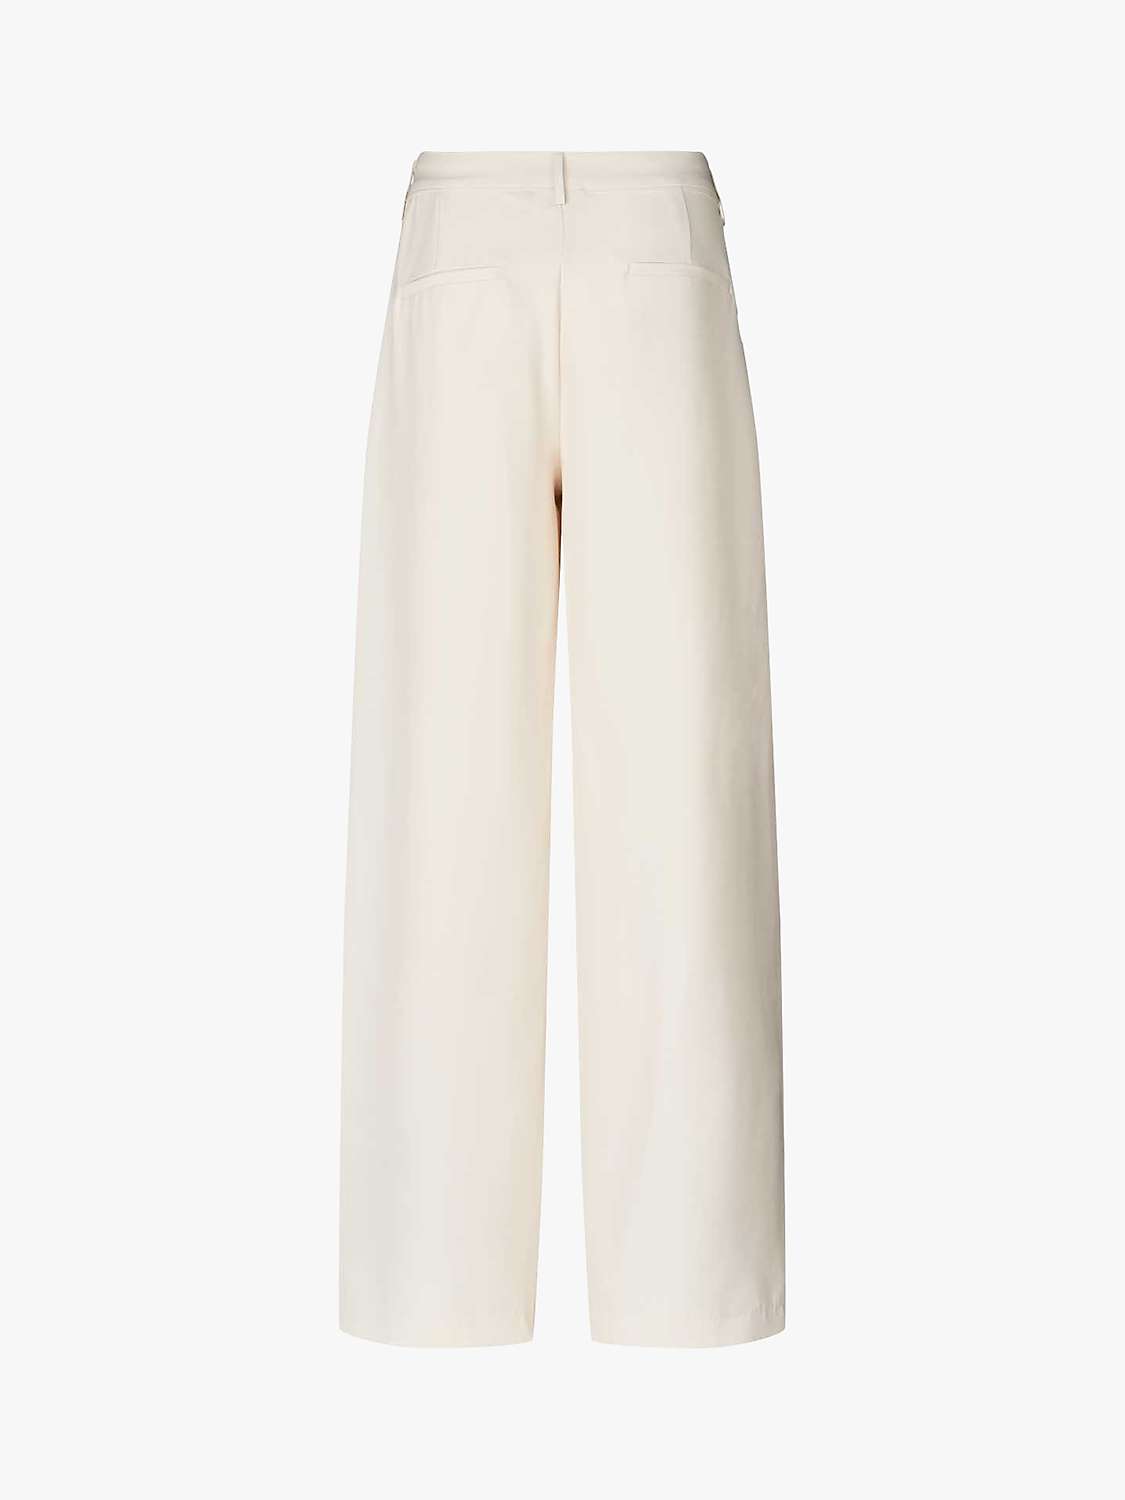 Buy Lolly's Laundry Leo Straight Fit Trousers, Creme Online at johnlewis.com